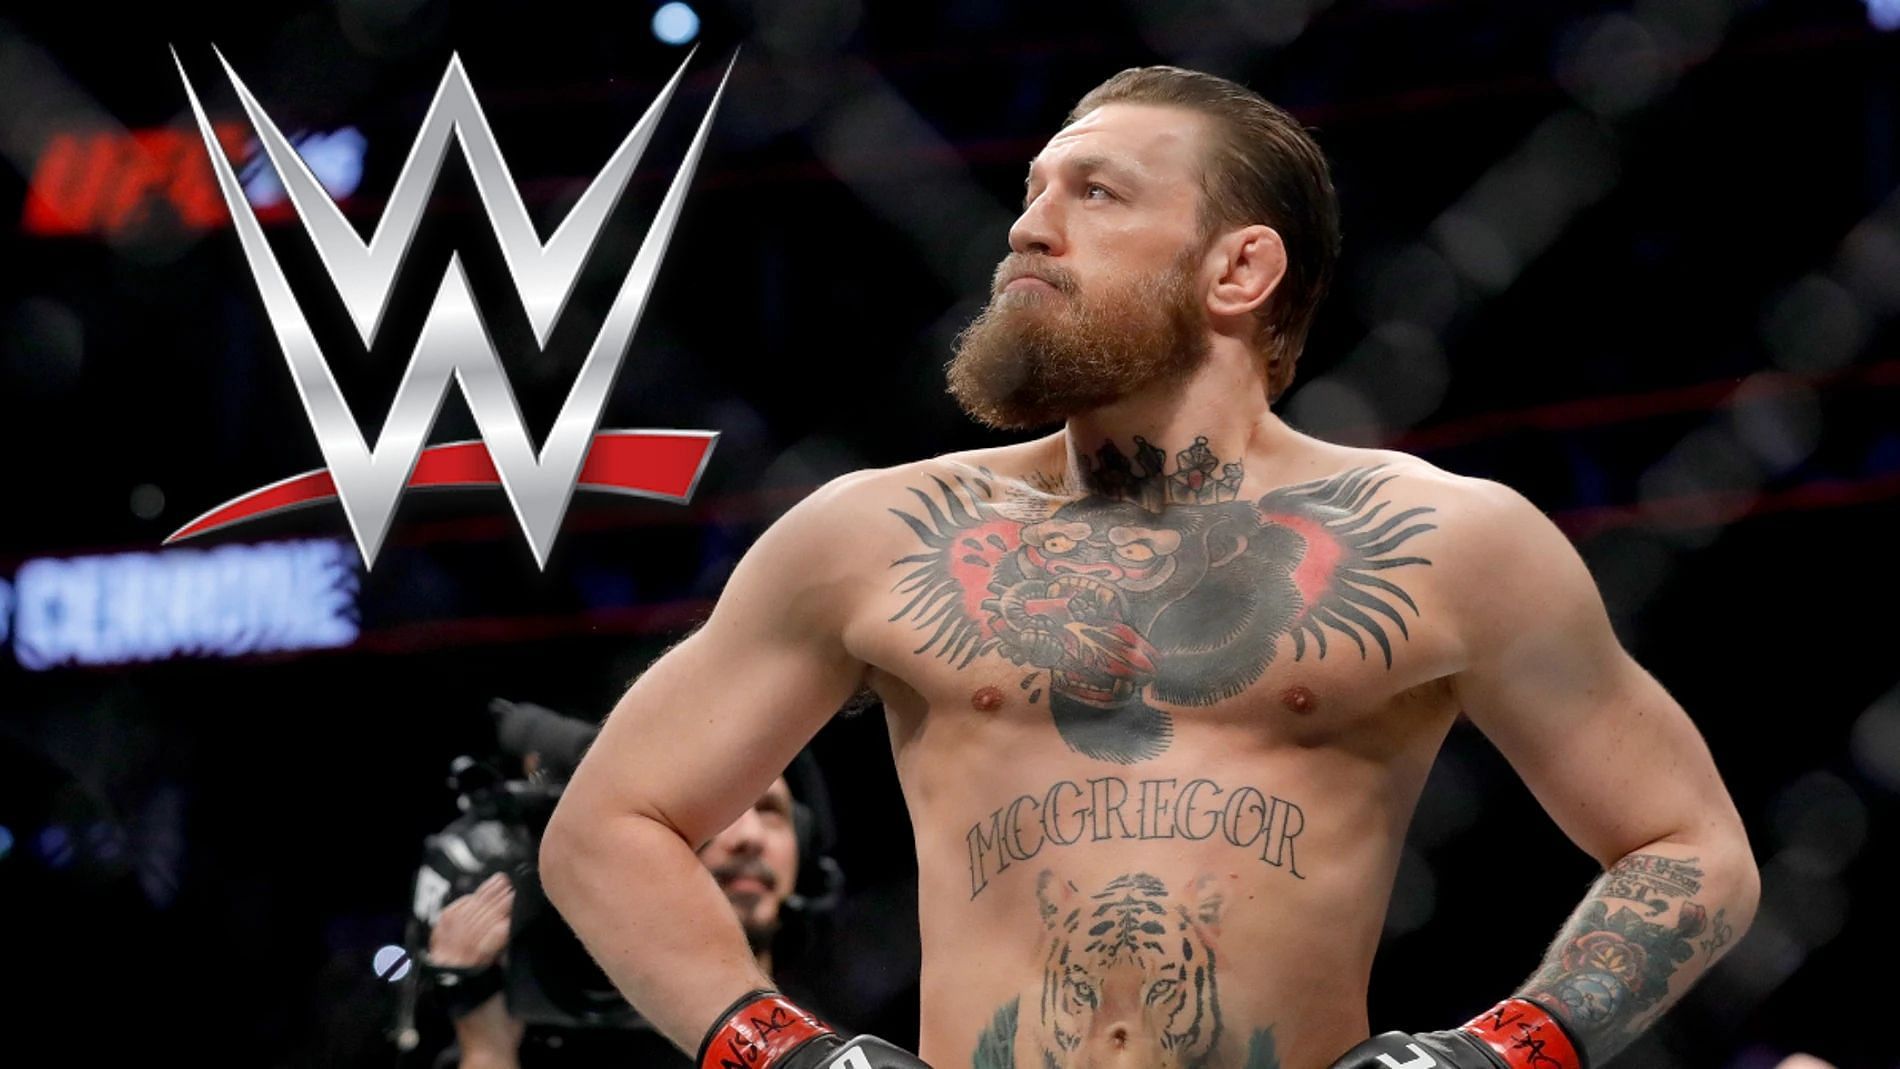 Conor McGregor is one of the biggest names in sports today.